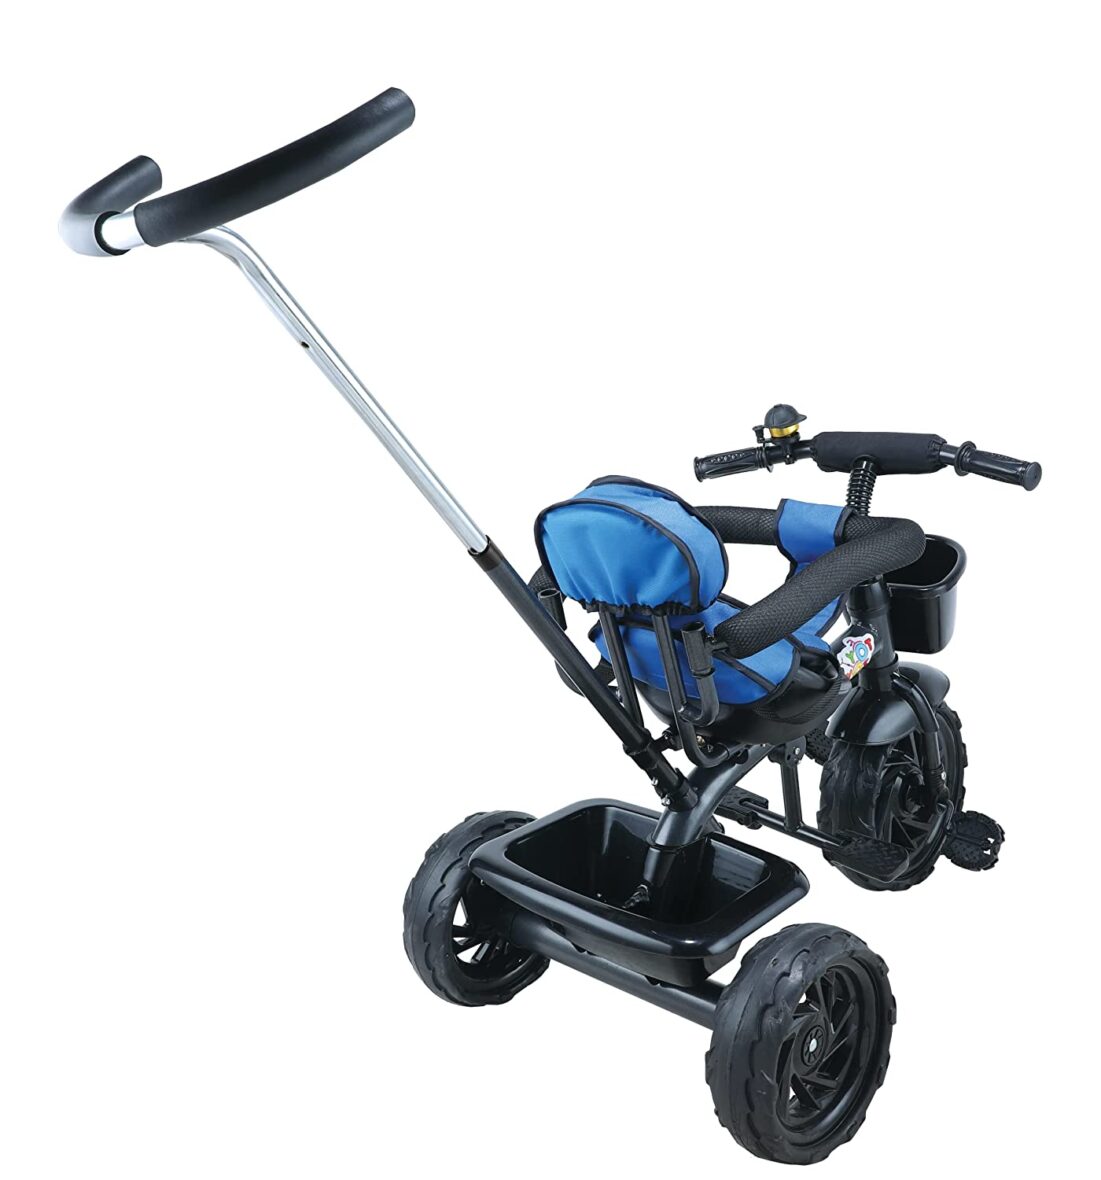 Toyzoy Maple Grand Kids|Baby Trike|Tricycle with Safety Guardrail for Kids|Boys|Girls Age Group 2 to 5 Years, TZ-531 (Black & Blue)